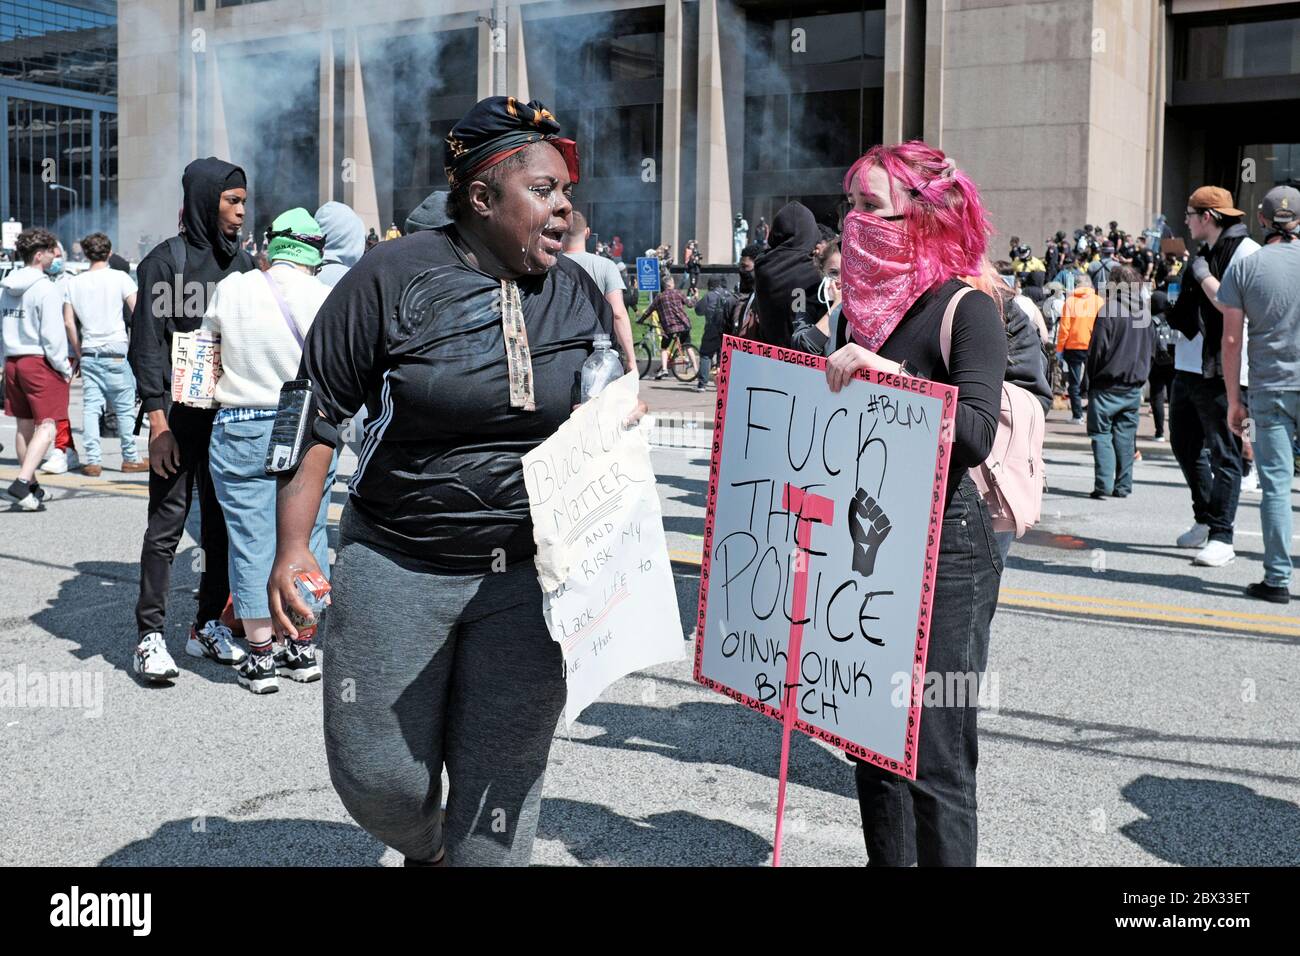 A black womans face is coated in milk in attempts to neutralize the effects of pepper spray shot during protests in Cleveland, Ohio, USA. Stock Photo